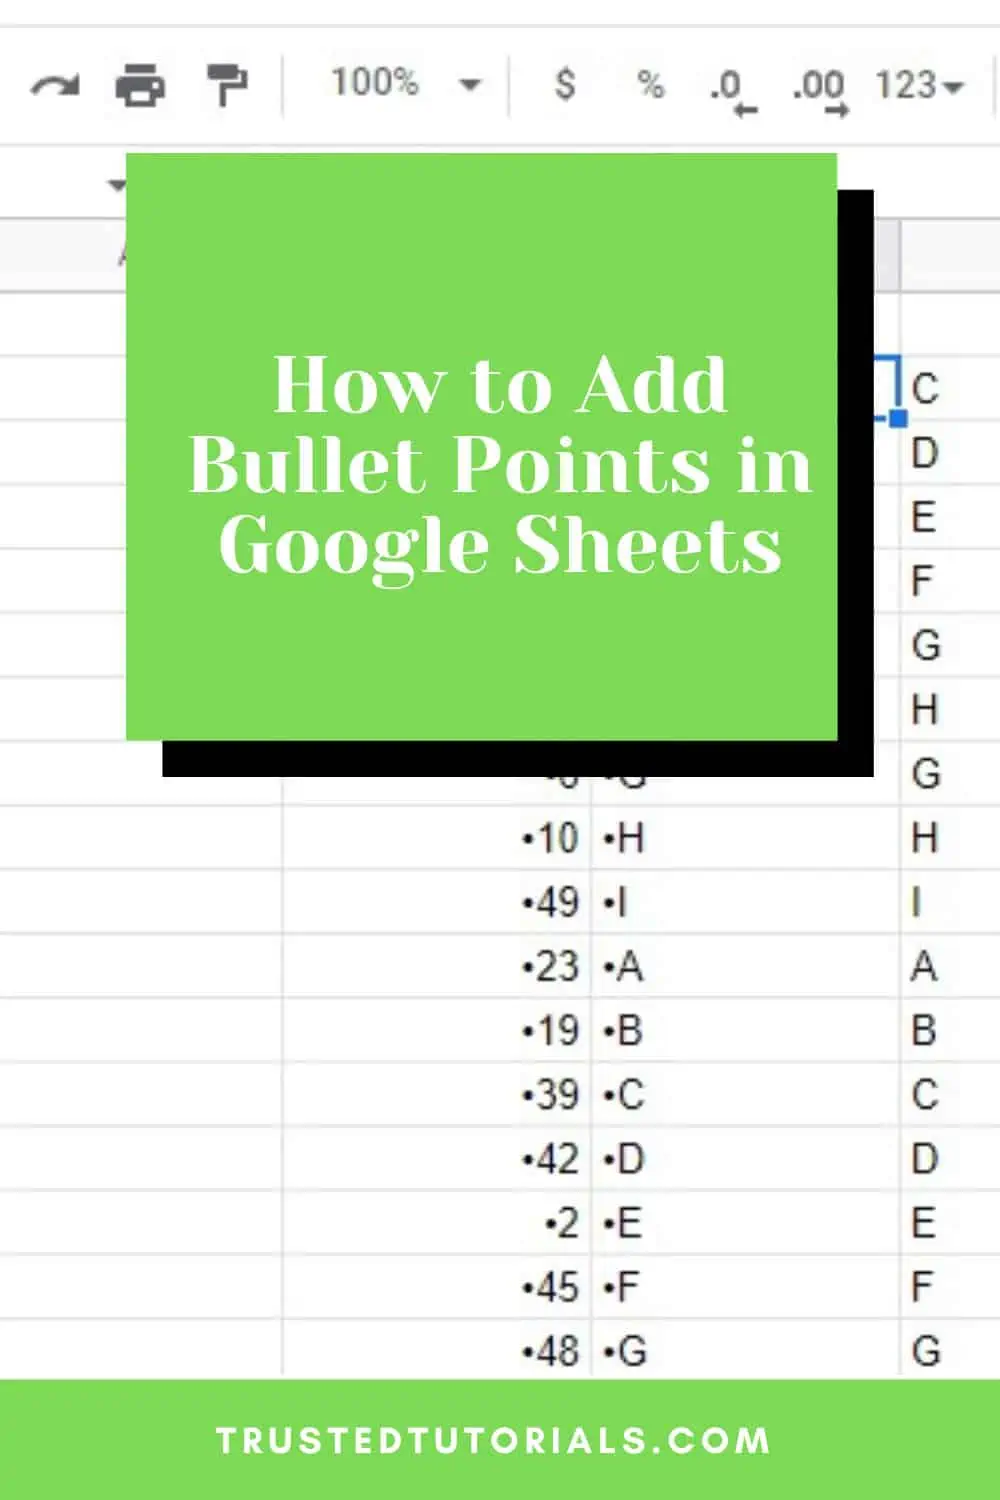 How to Add Bullet Points in Google Sheets